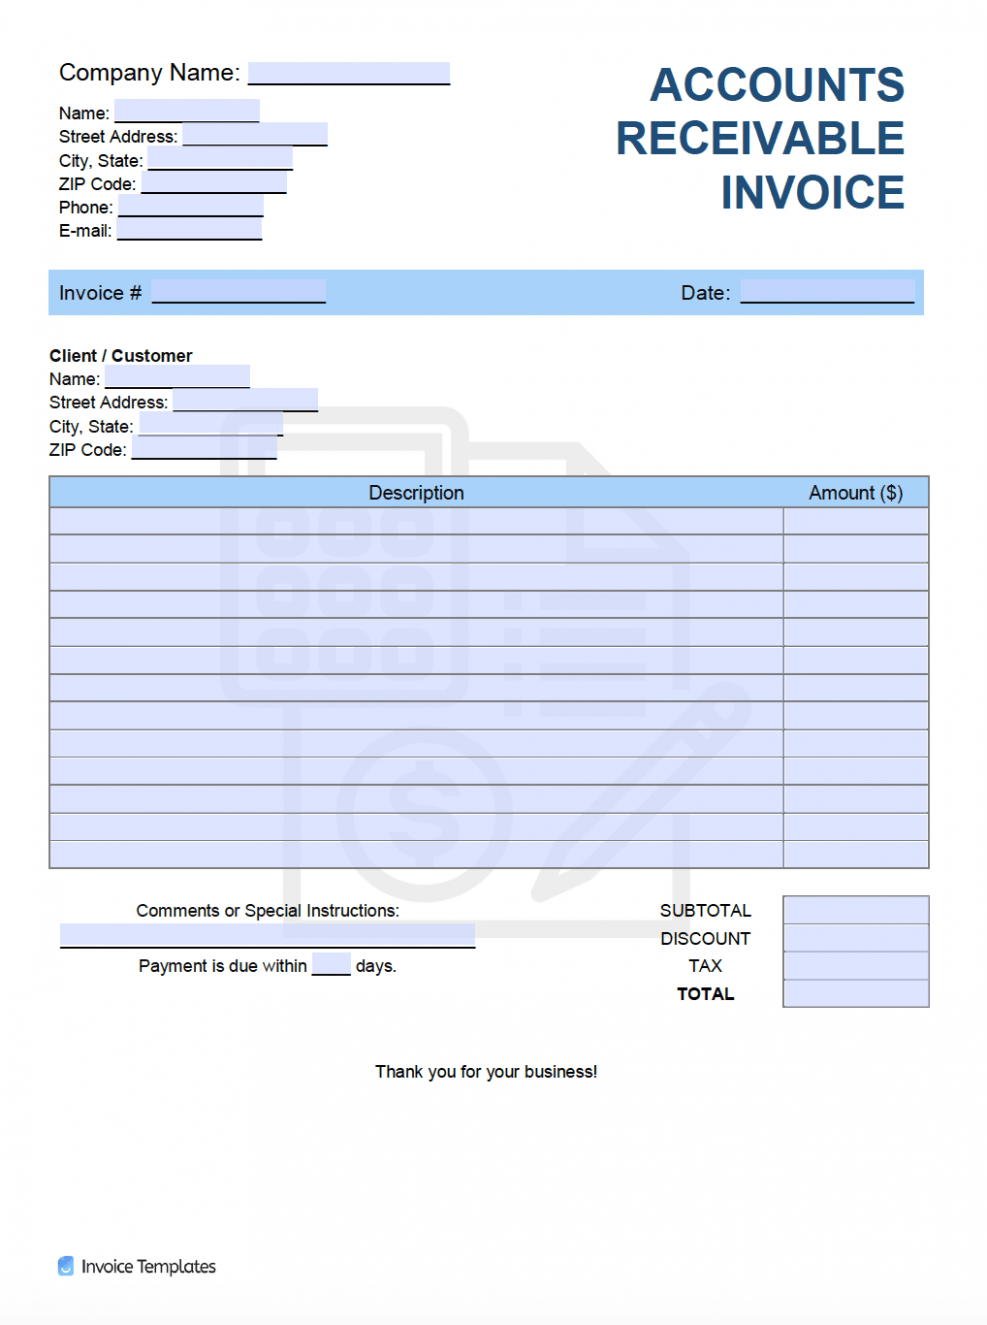 Printable Accounts Receivable Invoice Template Word